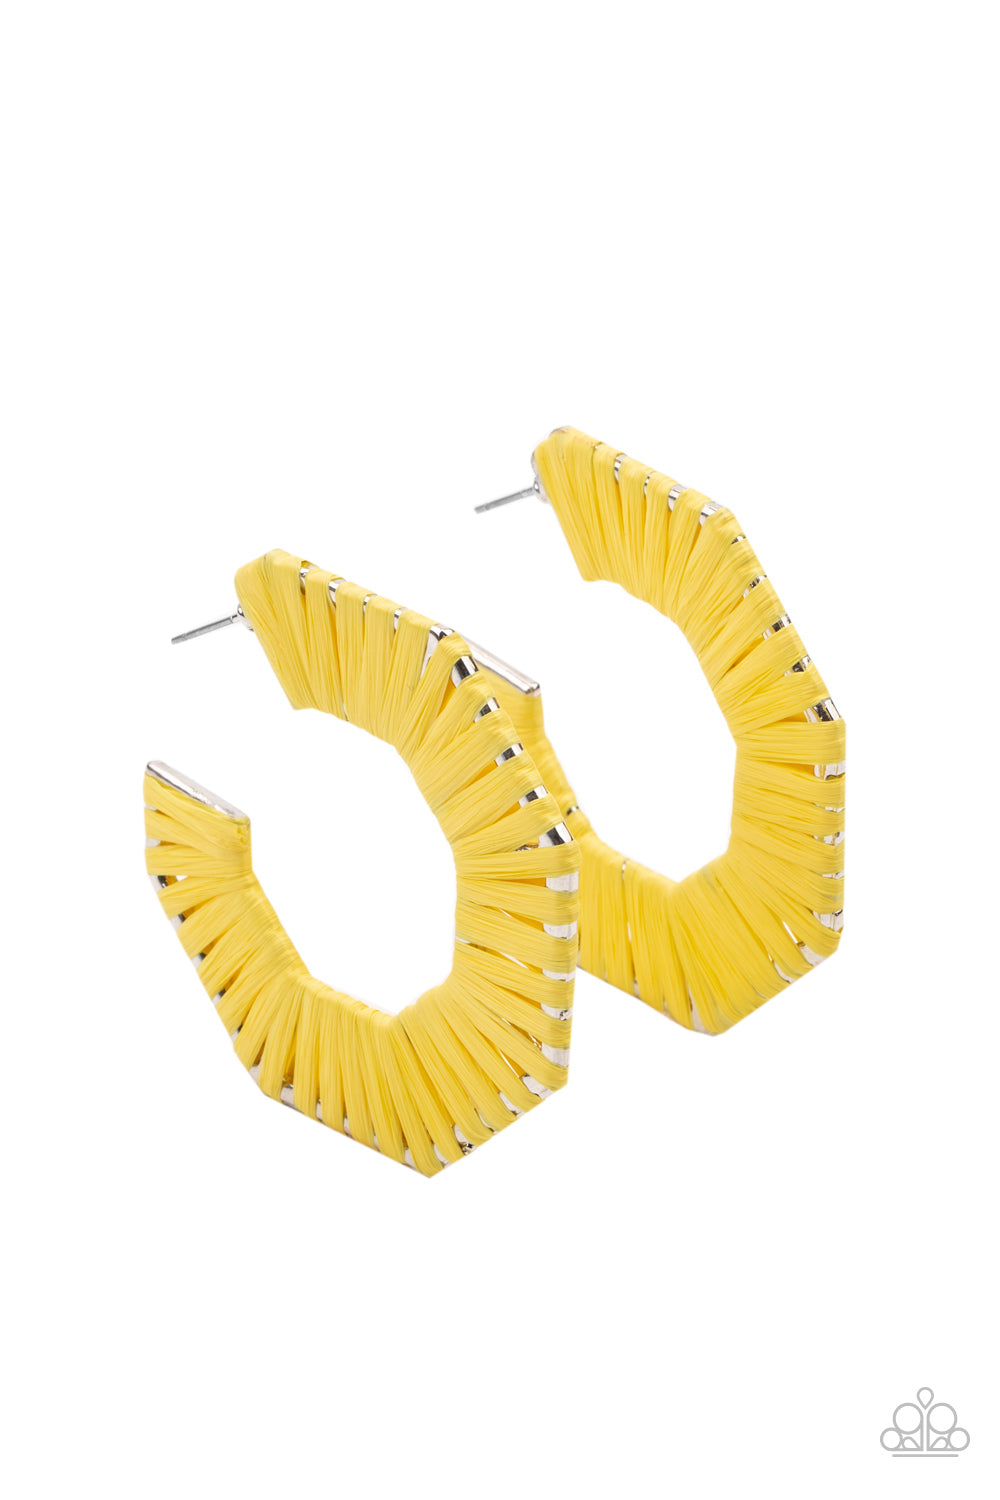 Fabulously Fiesta Yellow Hoop Earring - Paparazzi Accessories  Illuminating wicker-like cording is wrapped around a hexagonal hoop, creating a colorful pop of color. Earring attaches to a standard post fitting. Hoop measures approximately 2" in diameter.  All Paparazzi Accessories are lead free and nickel free!  Sold as one pair of hoop earrings.